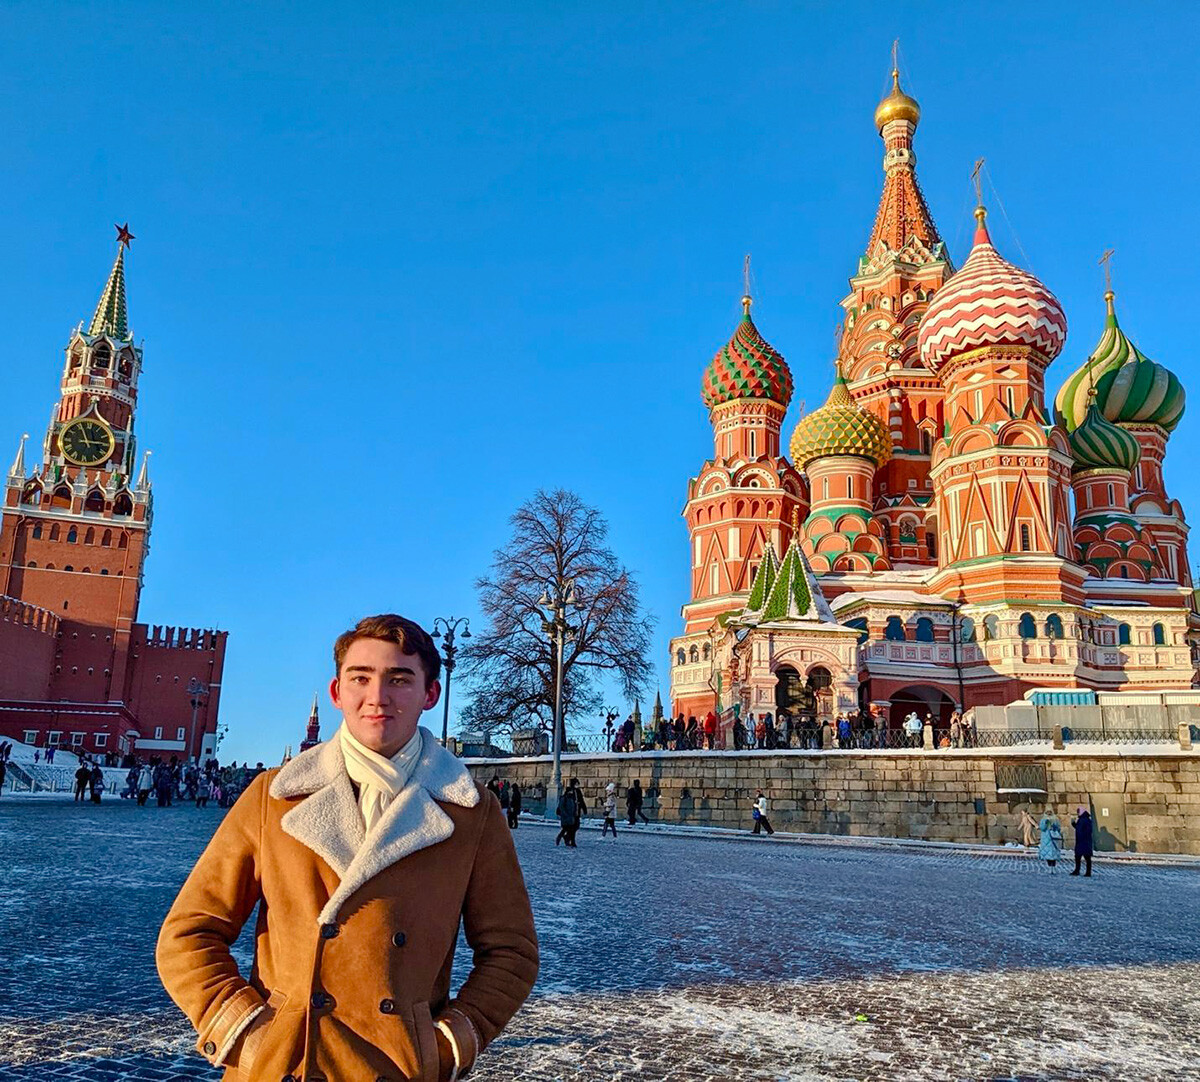 In front of Red Square in Moscow.